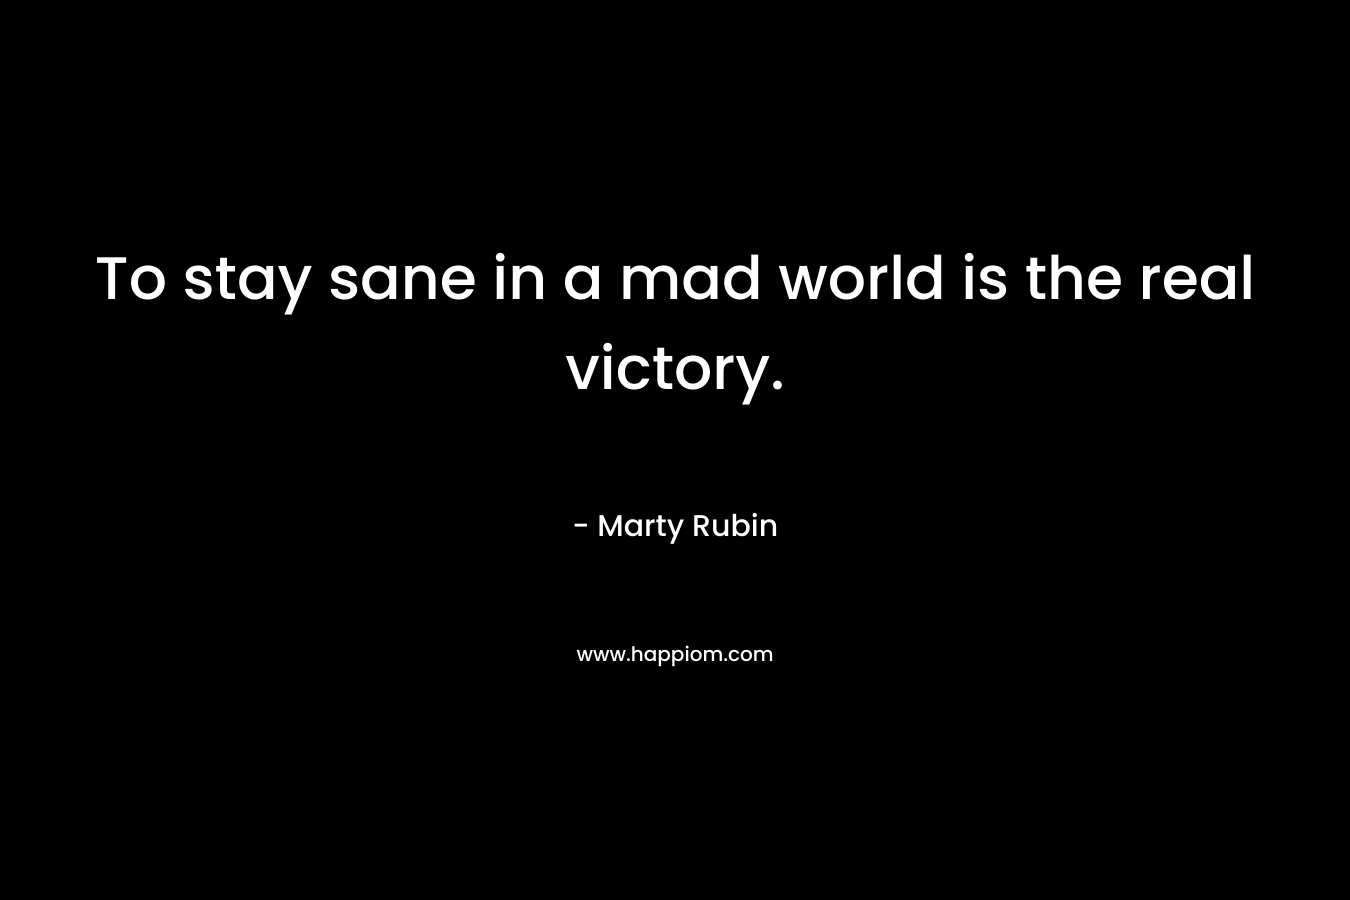 To stay sane in a mad world is the real victory. – Marty Rubin